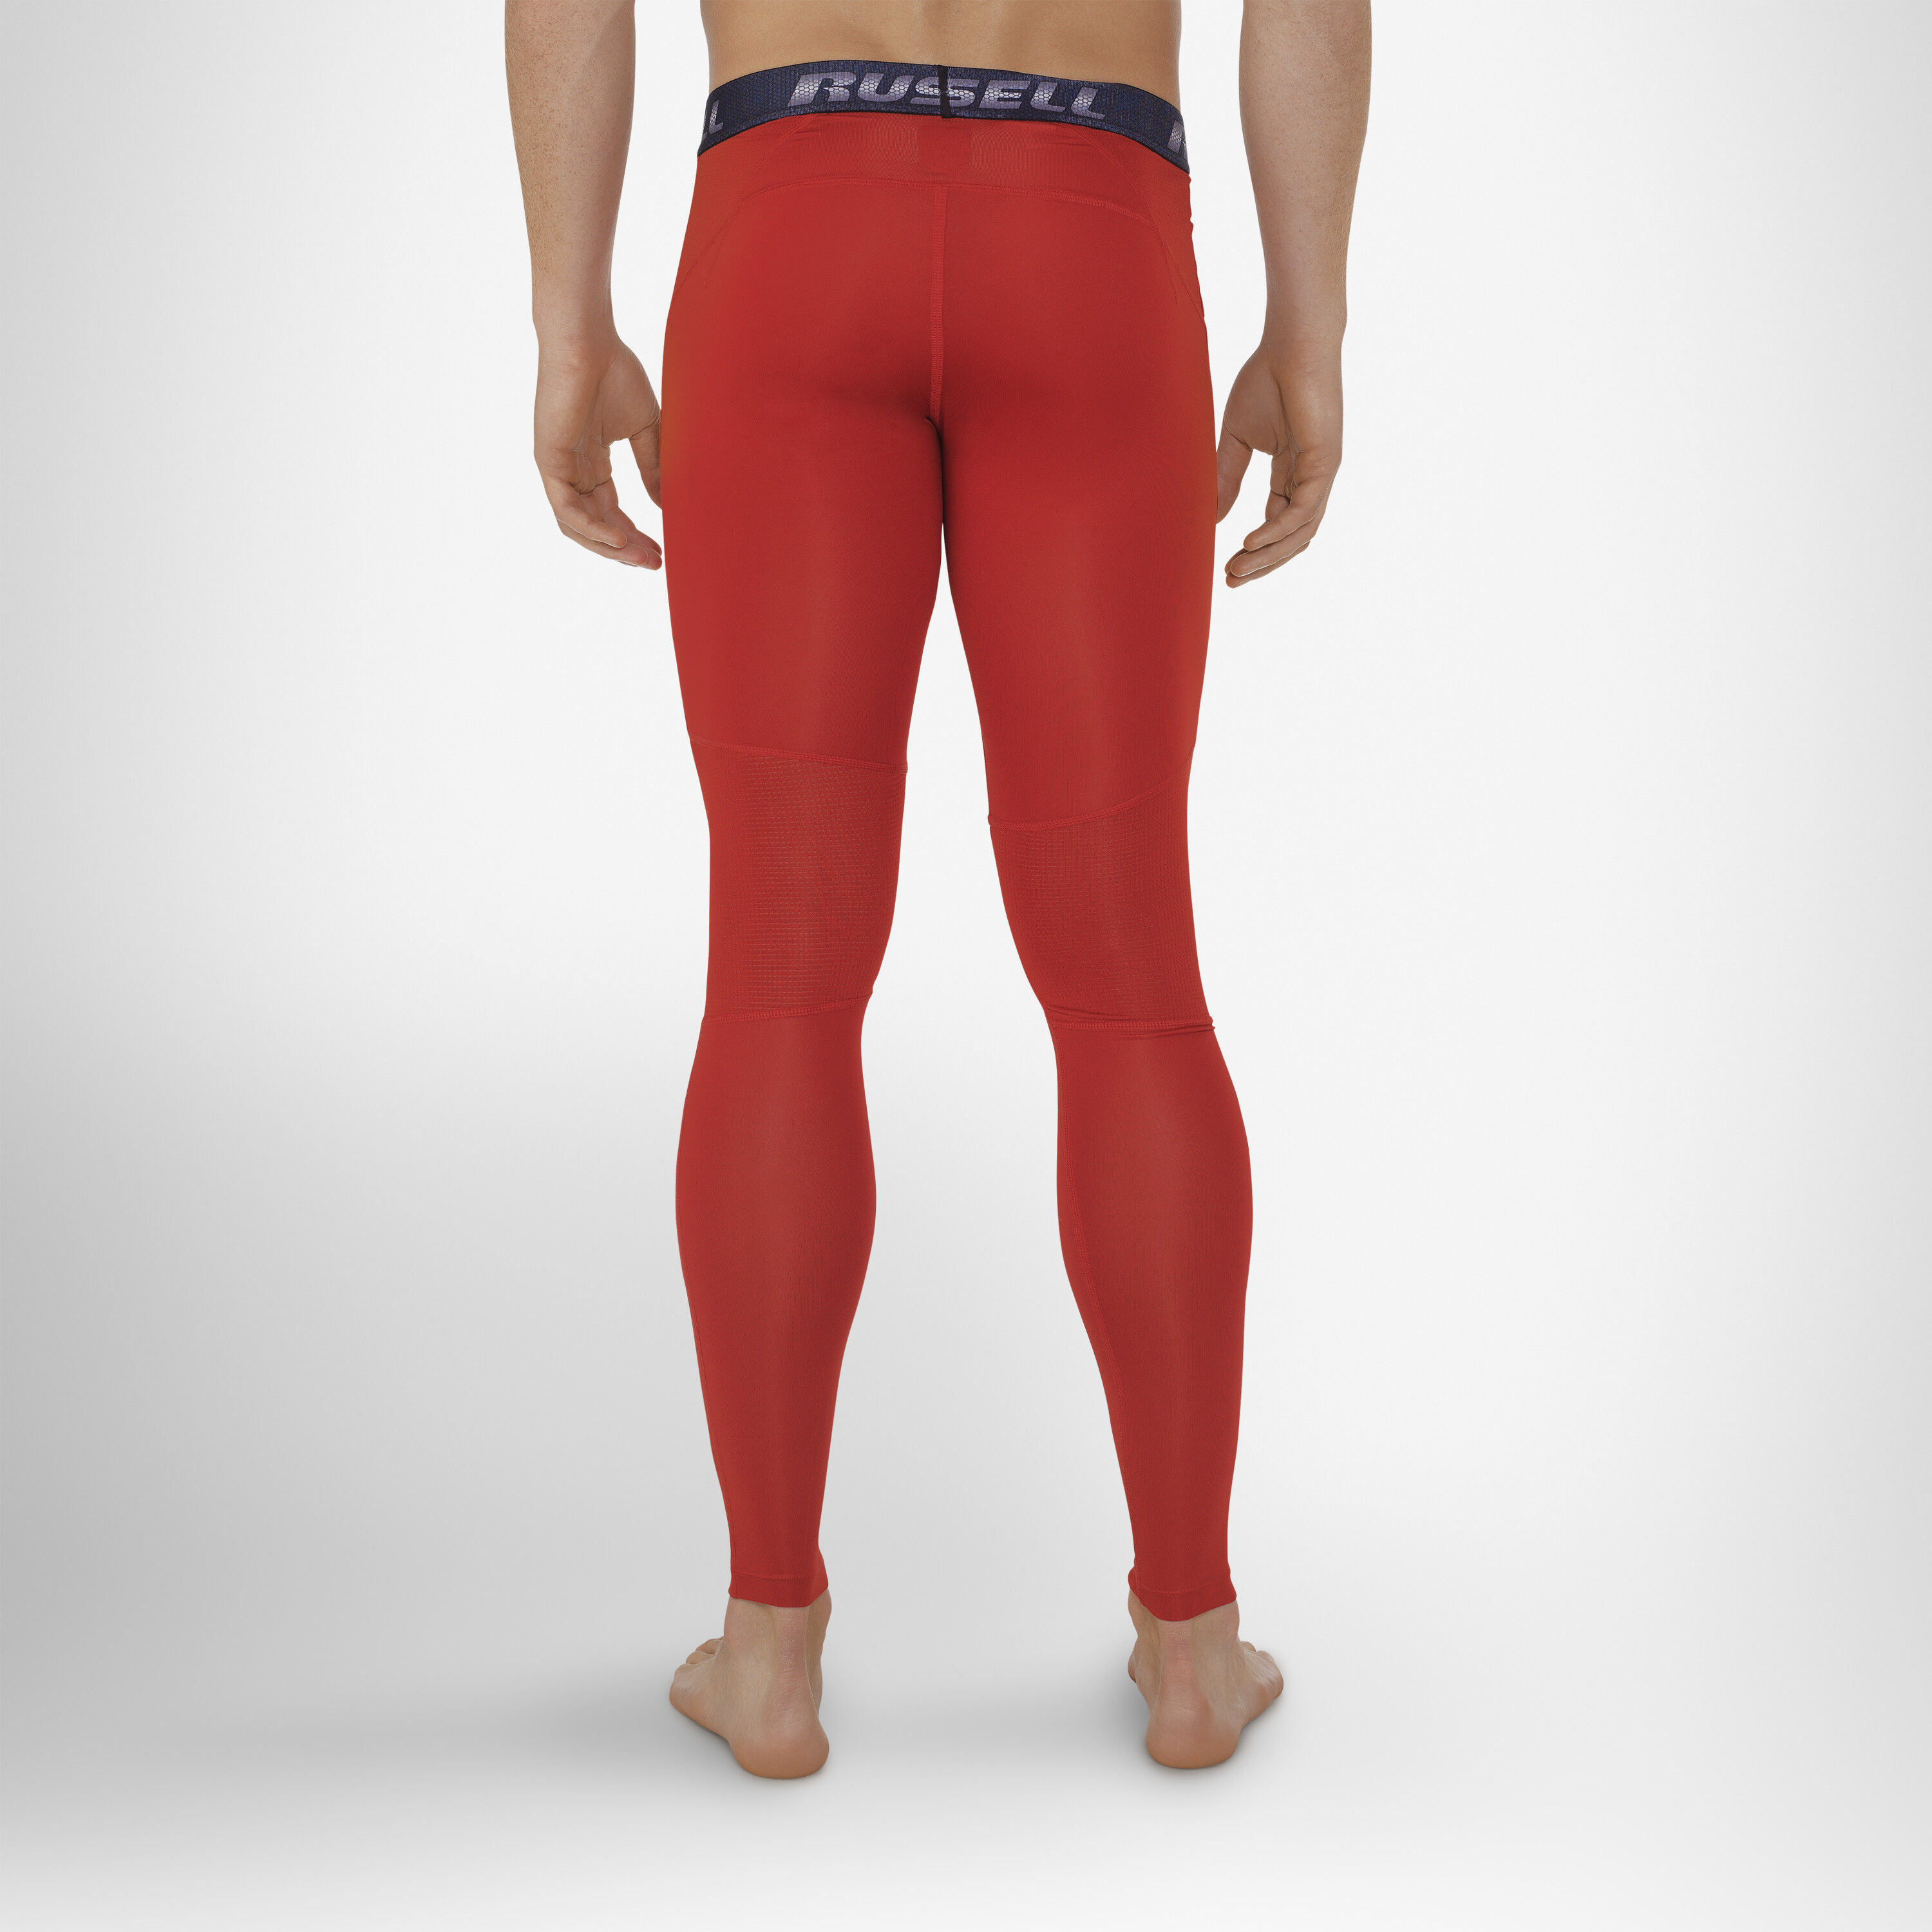 red nike compression tights